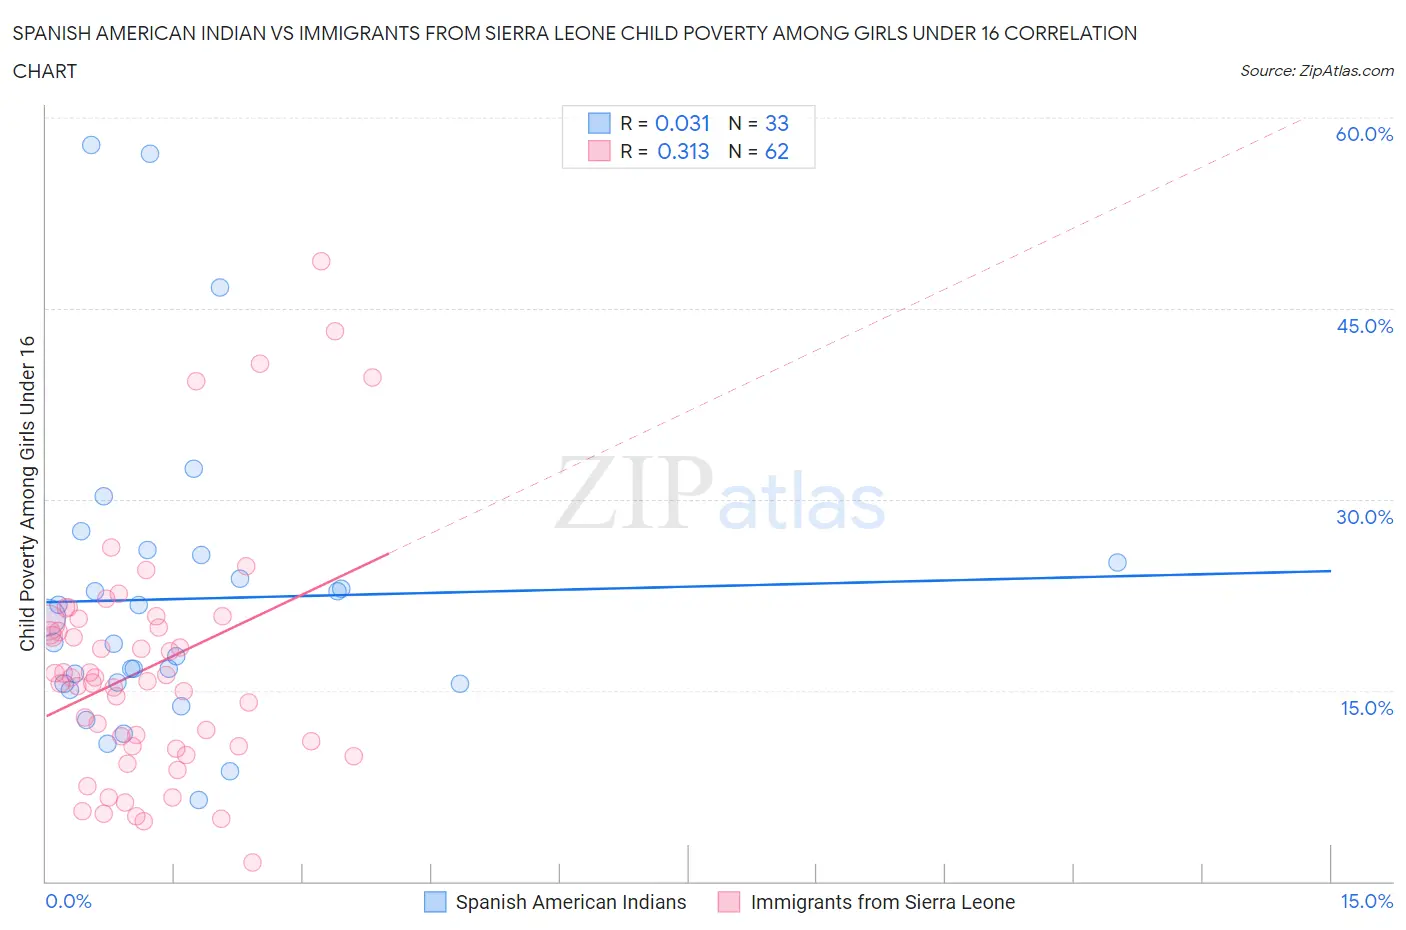 Spanish American Indian vs Immigrants from Sierra Leone Child Poverty Among Girls Under 16